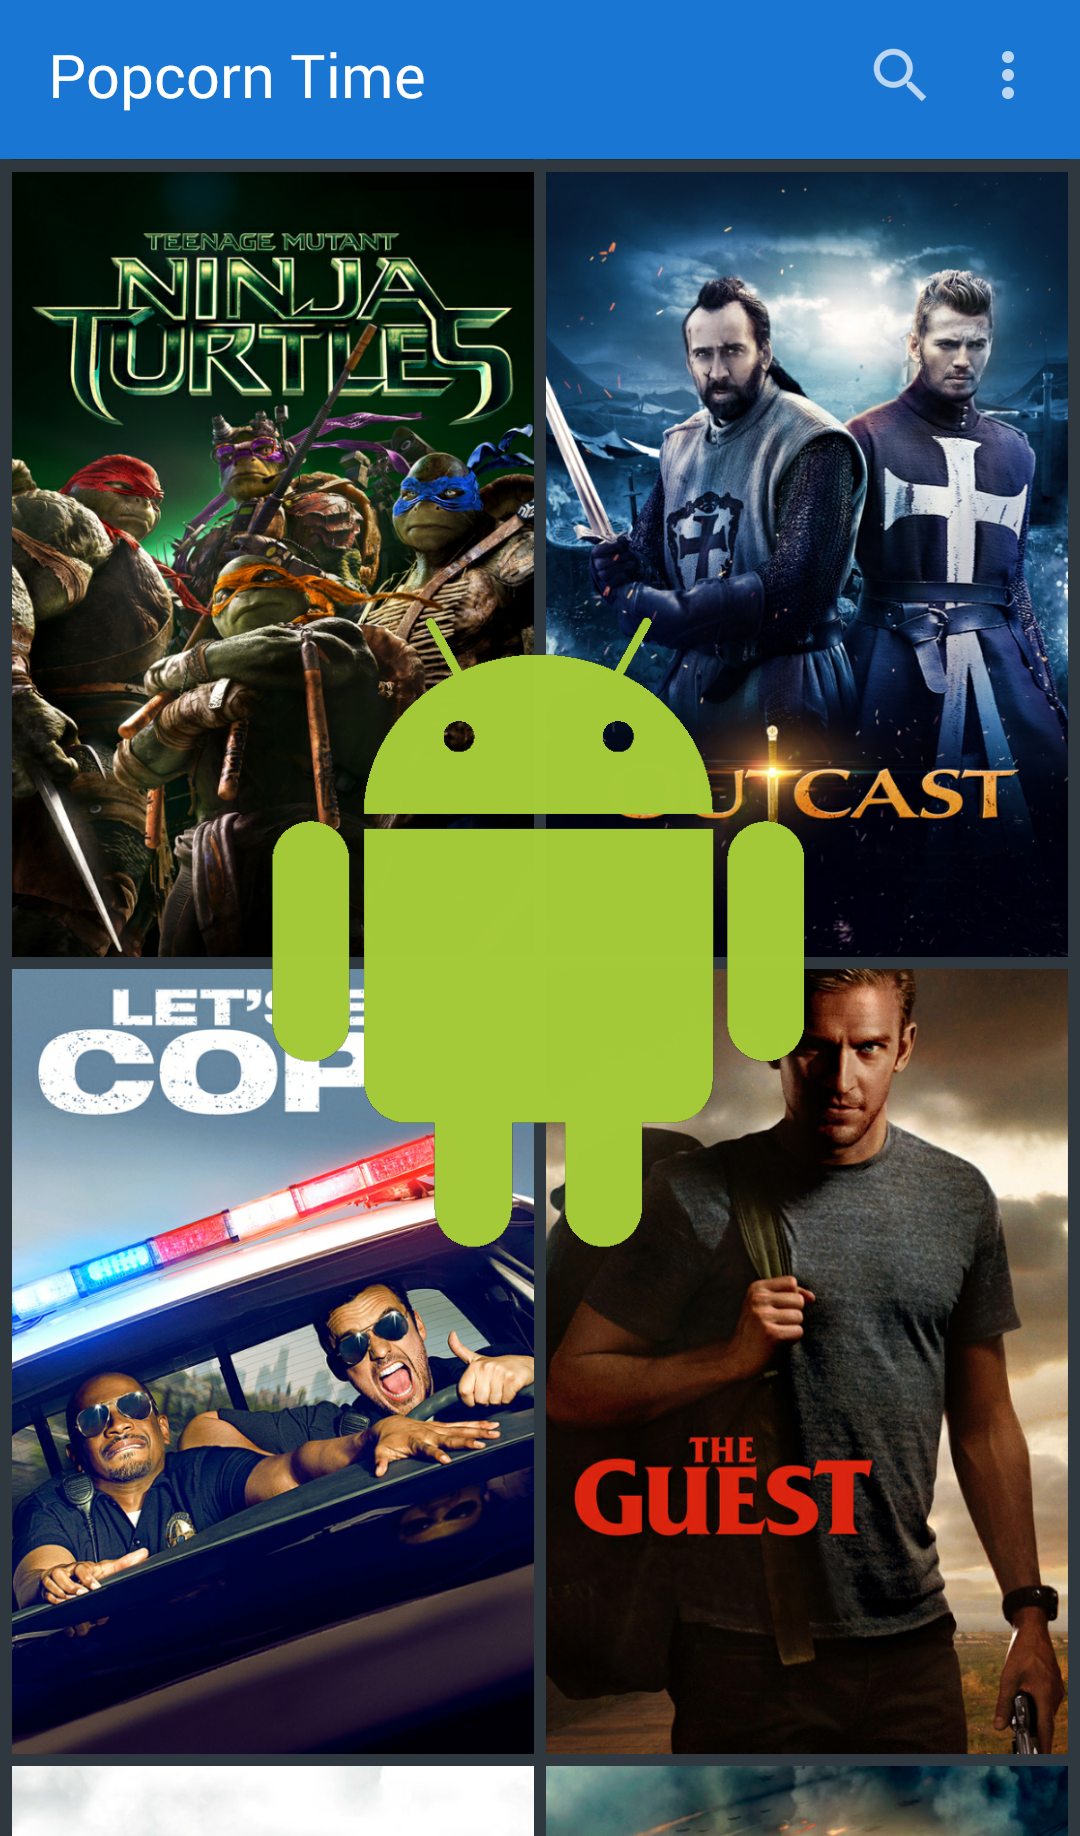 popcorn time android 7